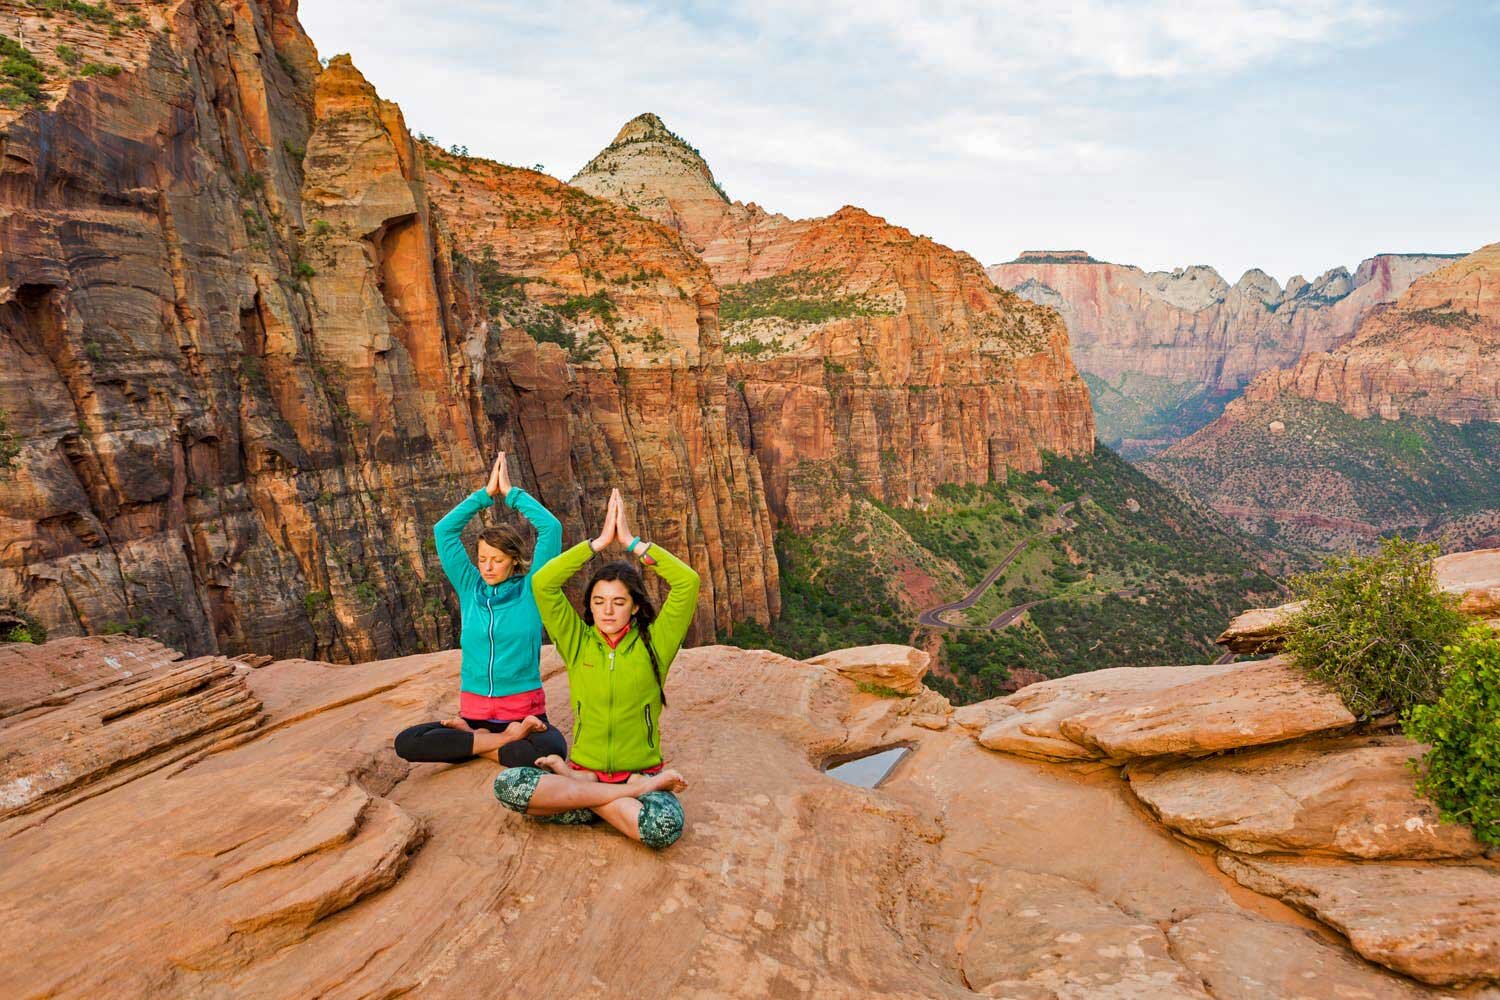 Free information on visiting zion national park from zion's original narrows outfitter & guide service. Zion Guru Zion Narrows Subway Canyoneering Scenic Tours Yoga